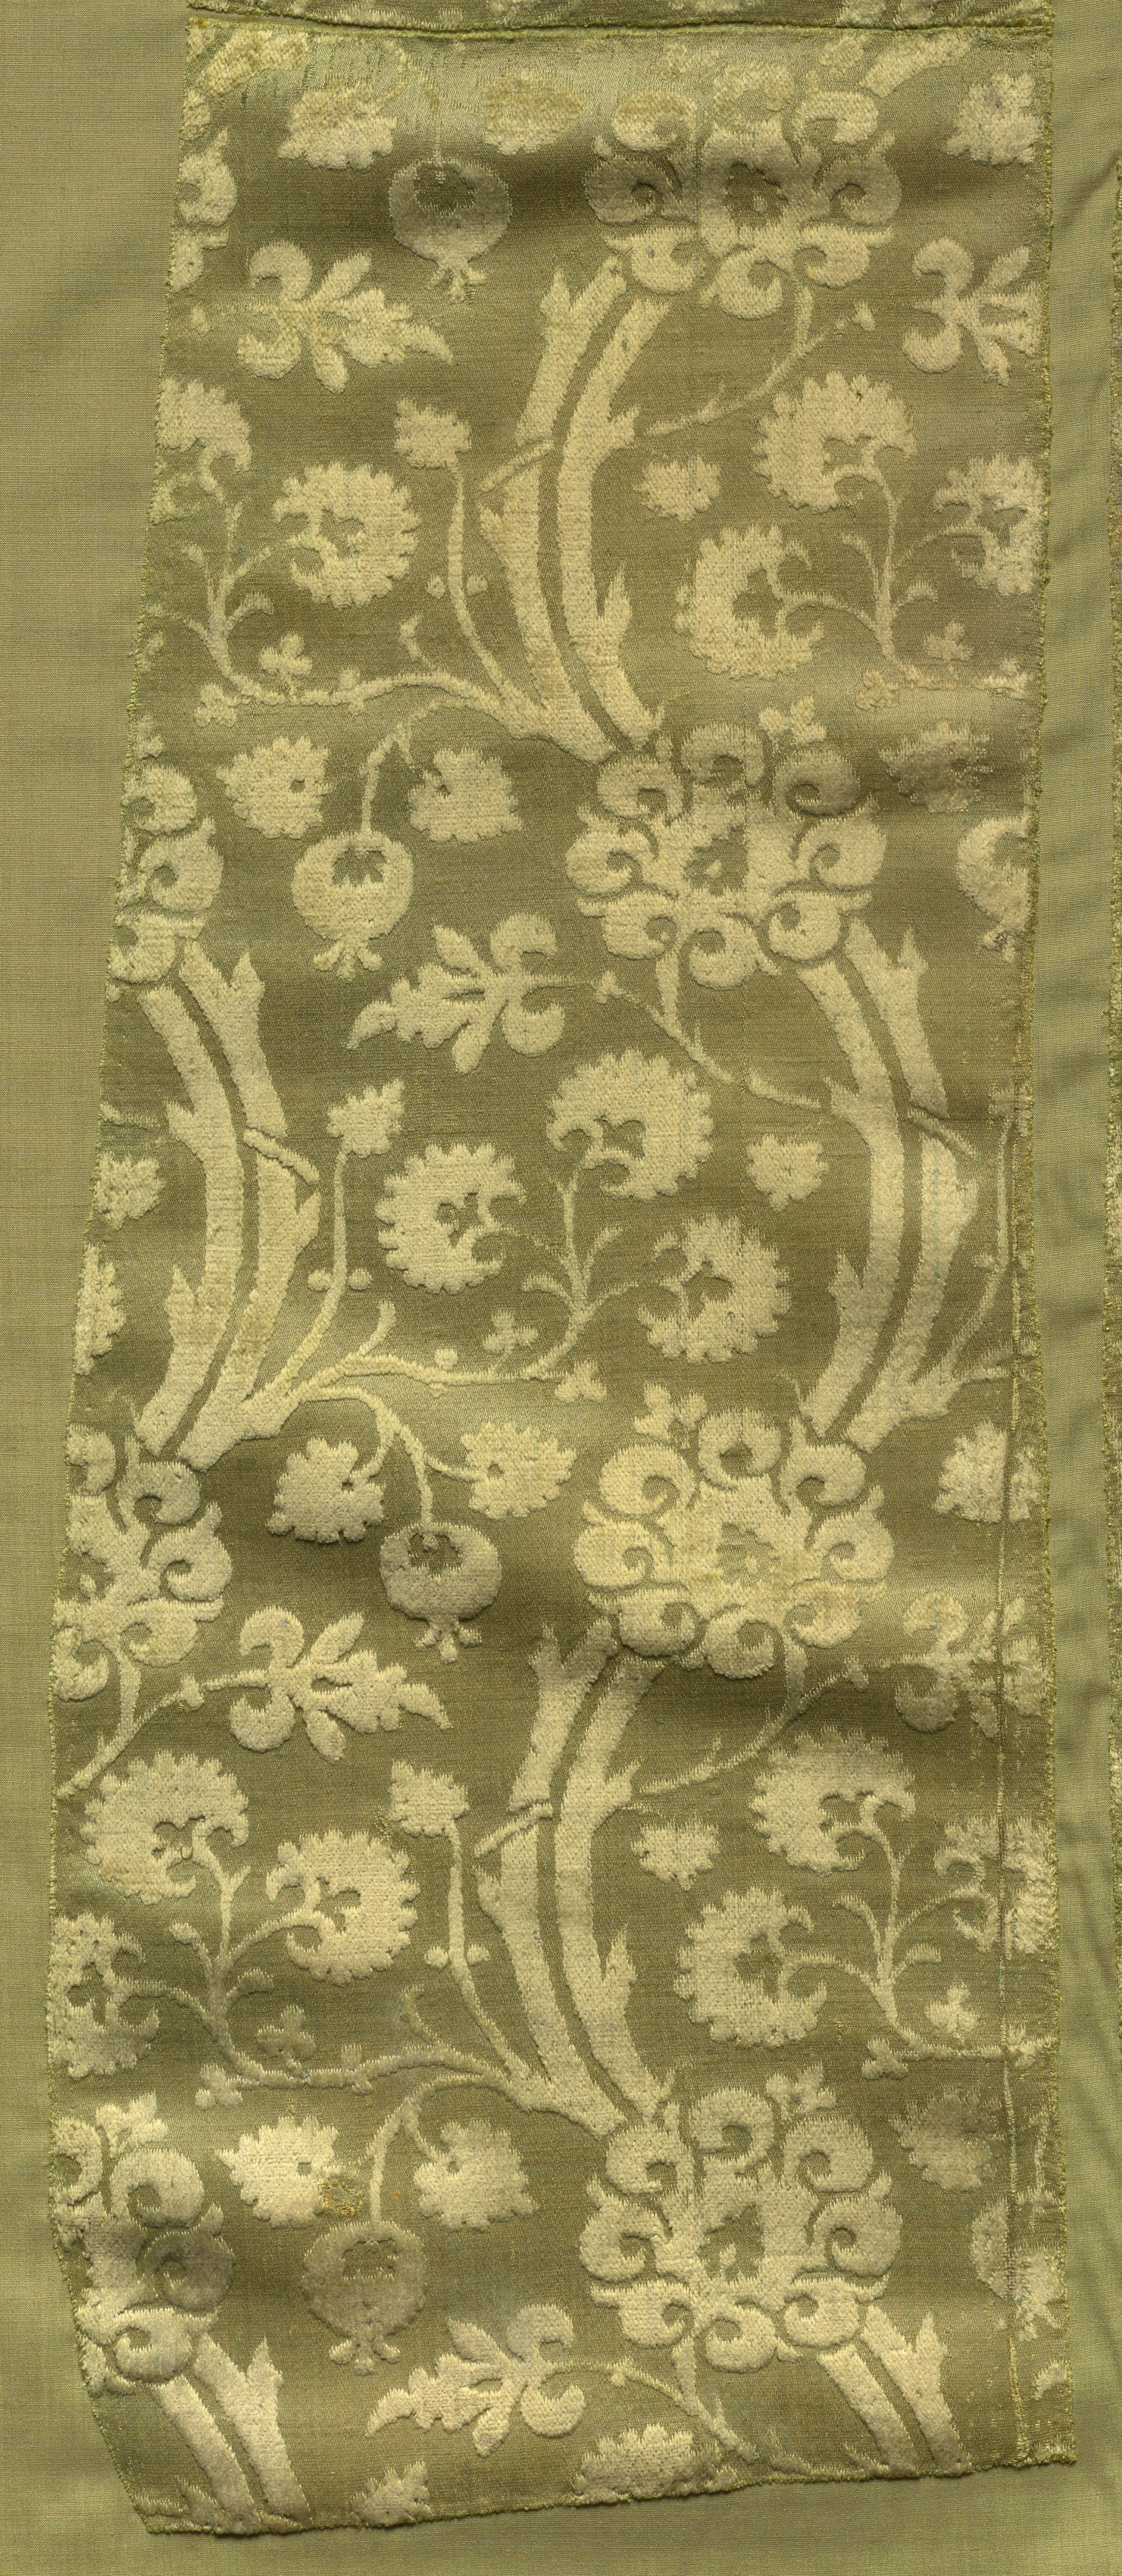 Fragment of a Chasuble